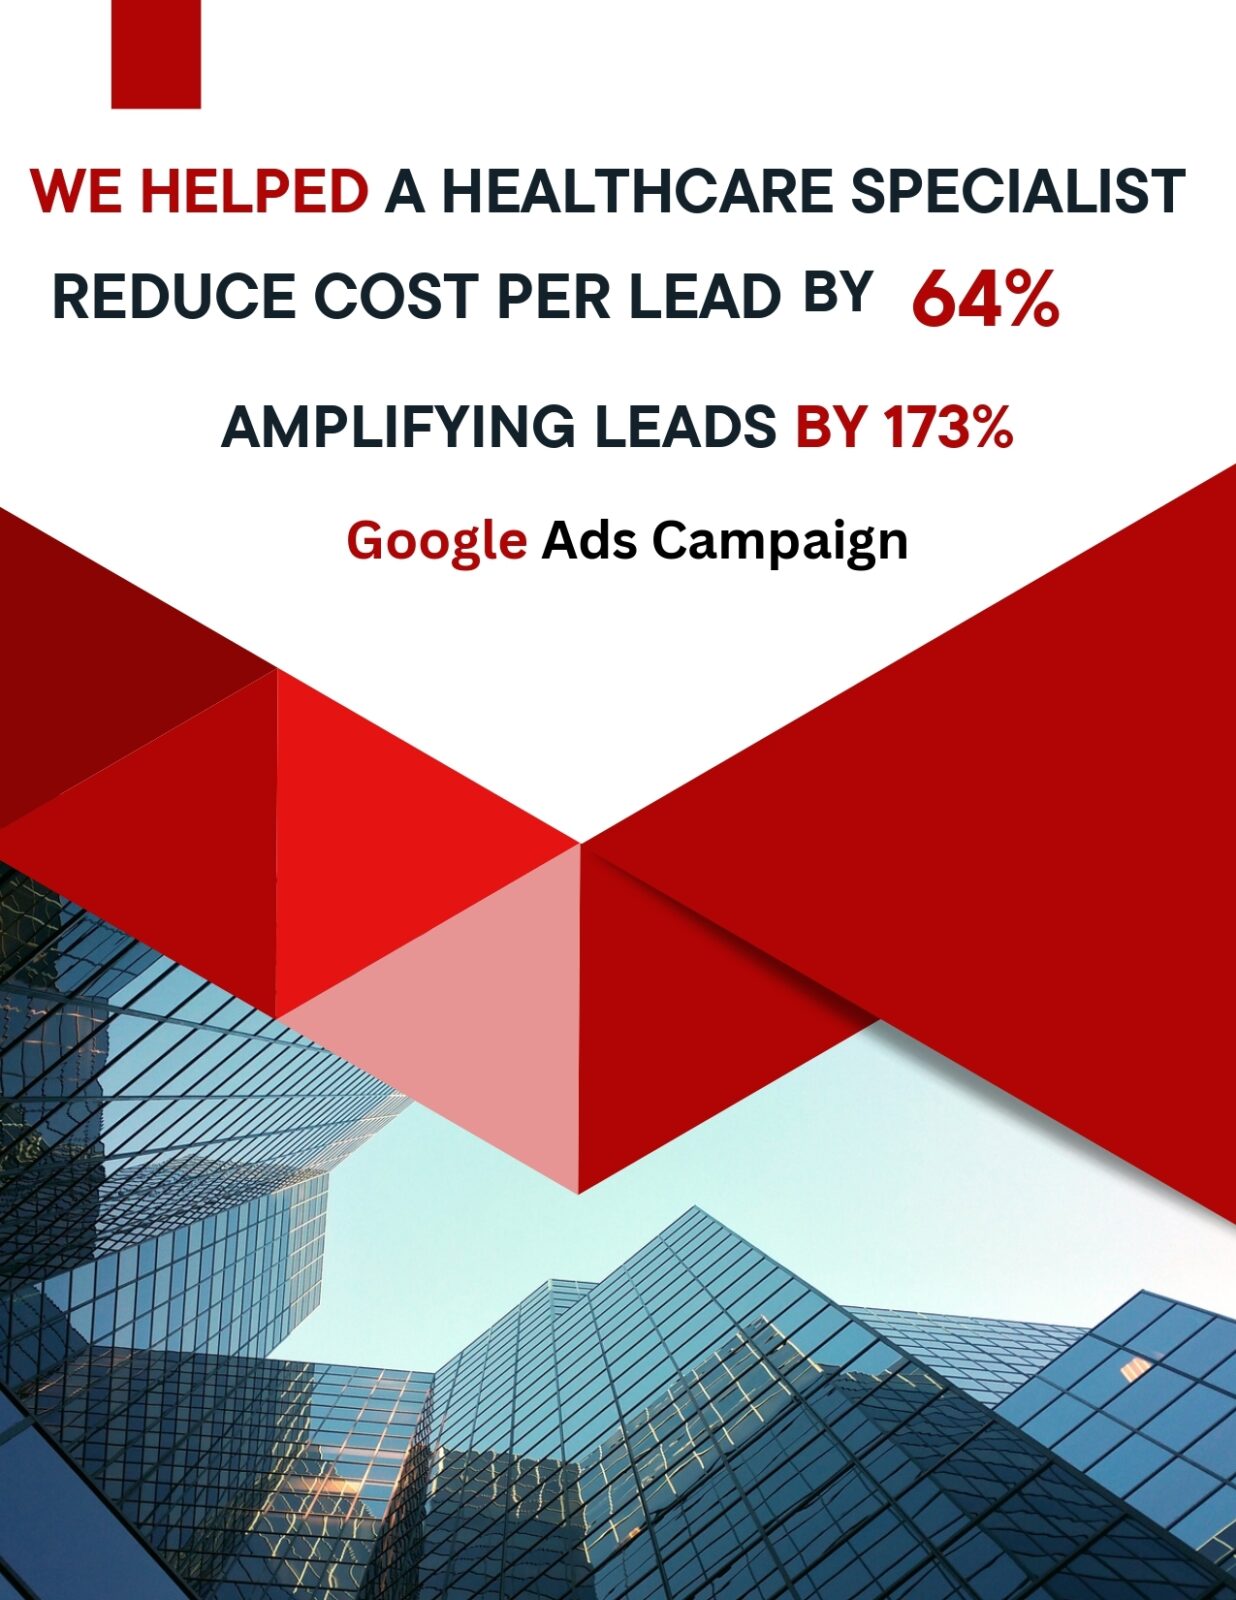 WE HELPED A HEALTHCARE SPECIALIST AMPLIFYING LEADS BY 173% REDUCE COST PER LEAD BY 64%